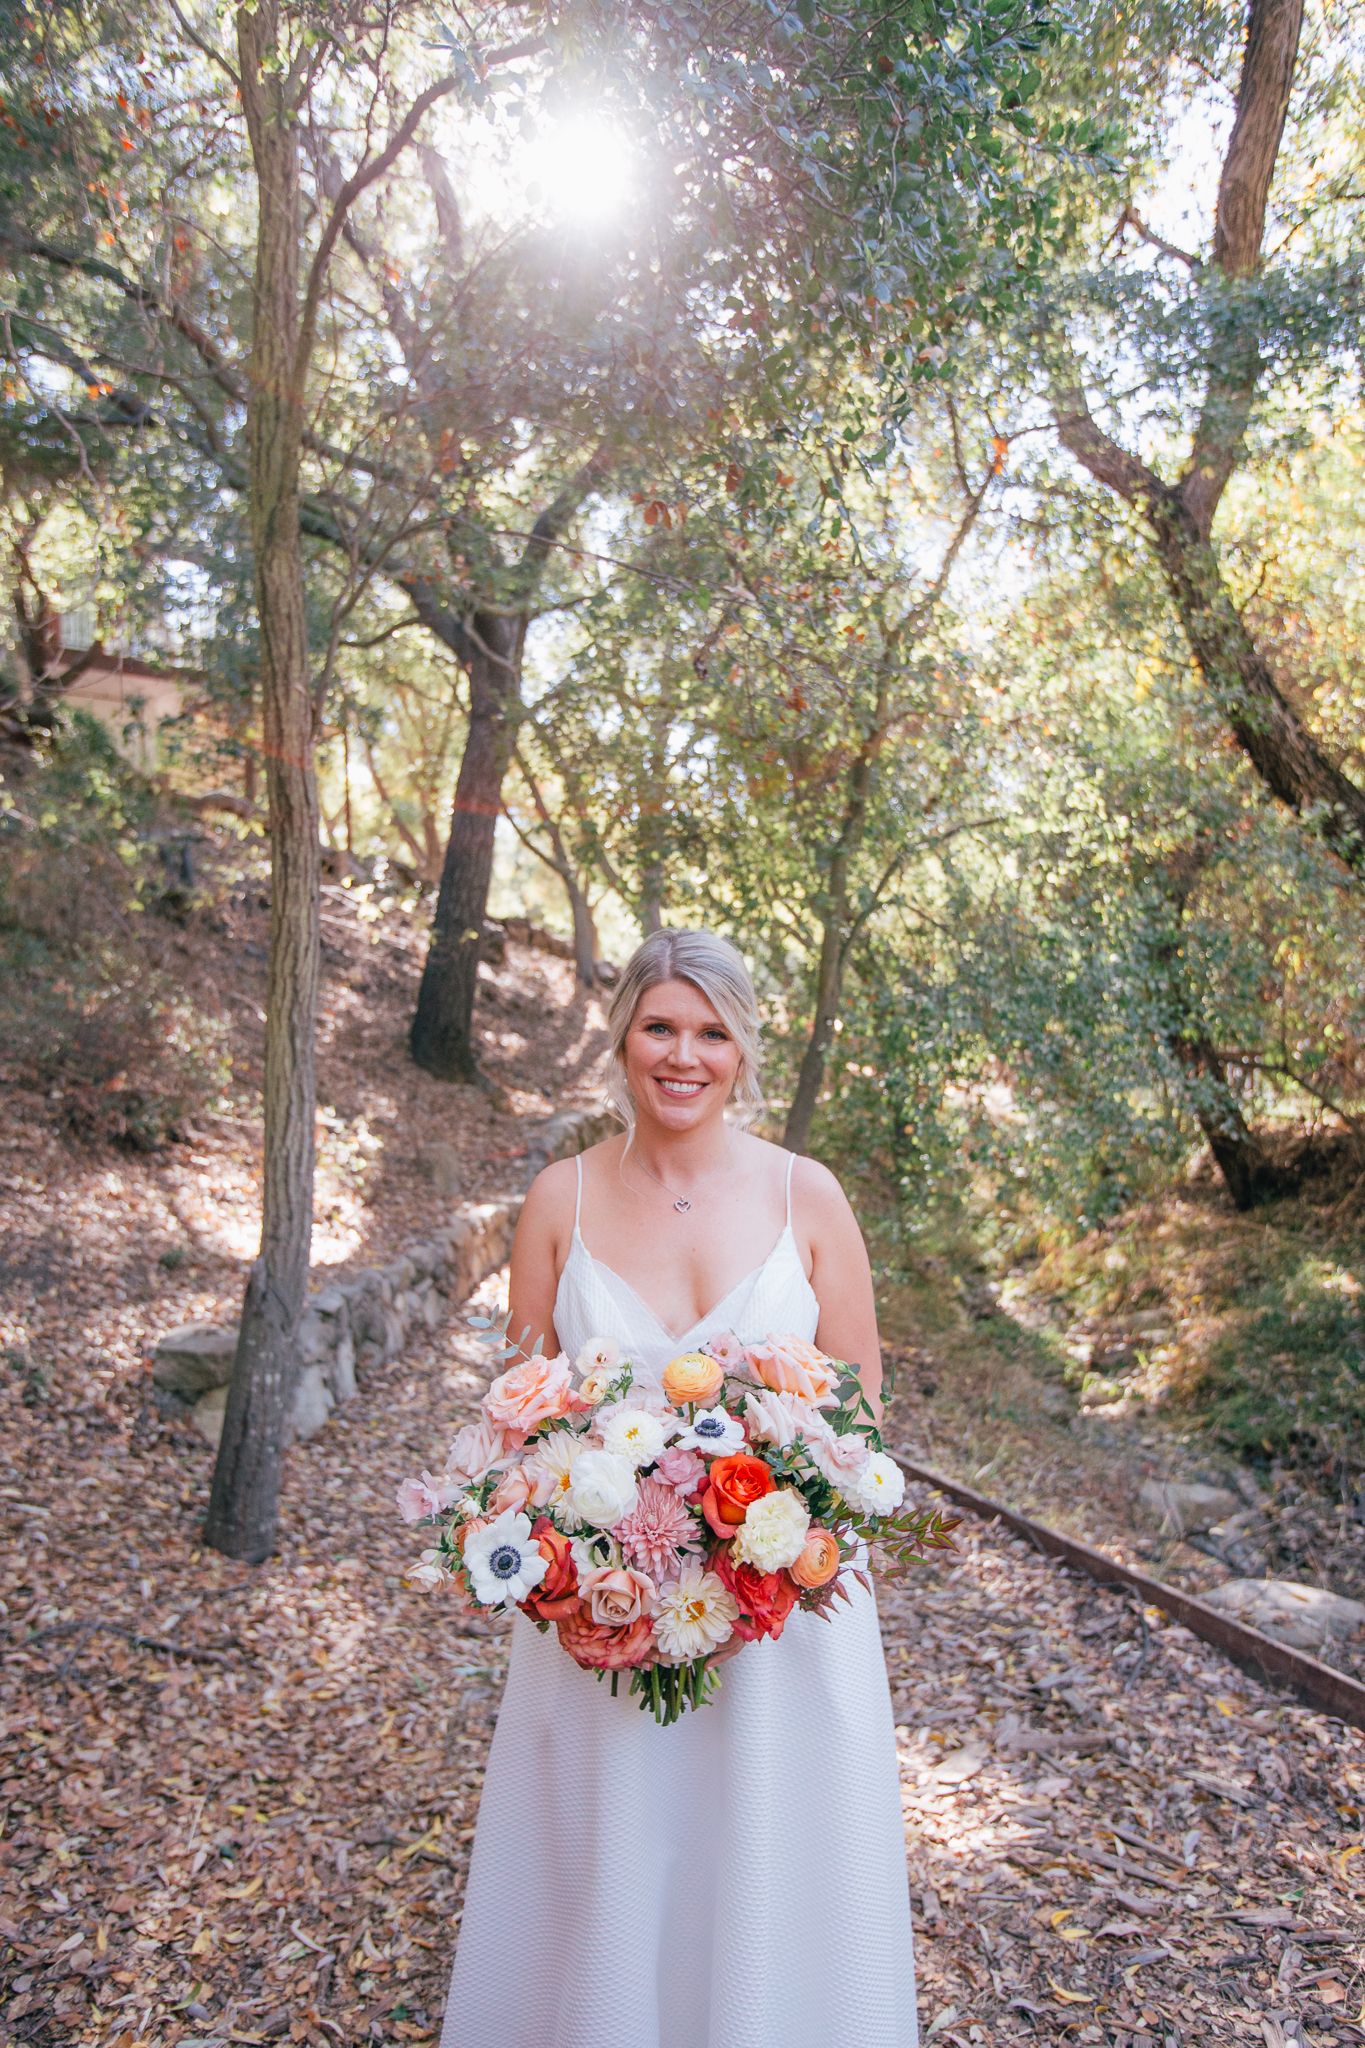 bride in spaghetti strap dress stands with bright and vibrant wedding bouquet with mixture of colorful flowers